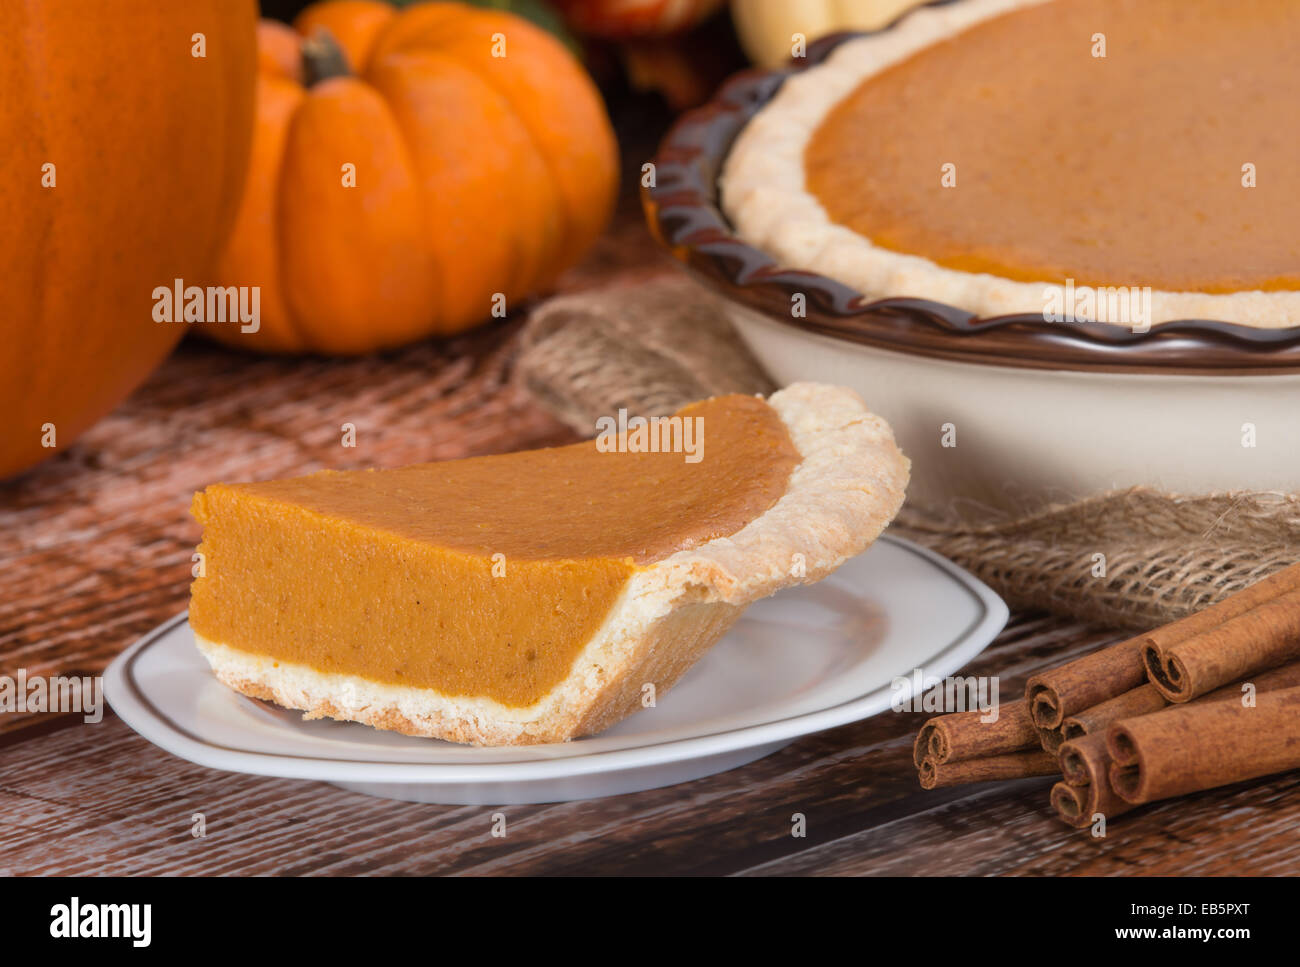 Slice of a pumpkin pie on wooden table. Pie and pumpkins on the background. Stock Photo